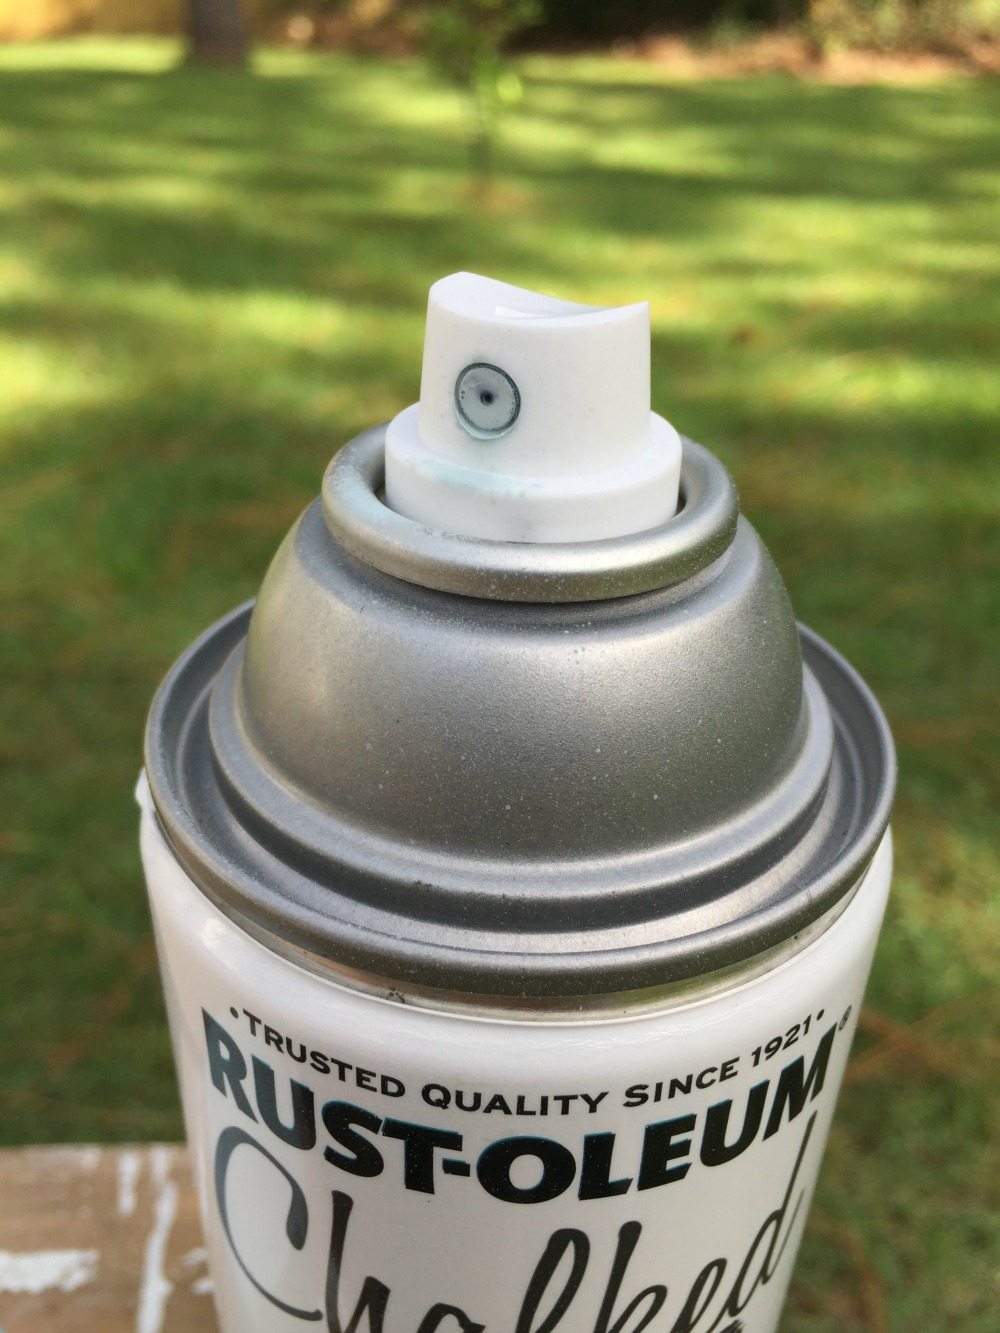 Love the spray nozzle of the Rustoleum Chalked paint